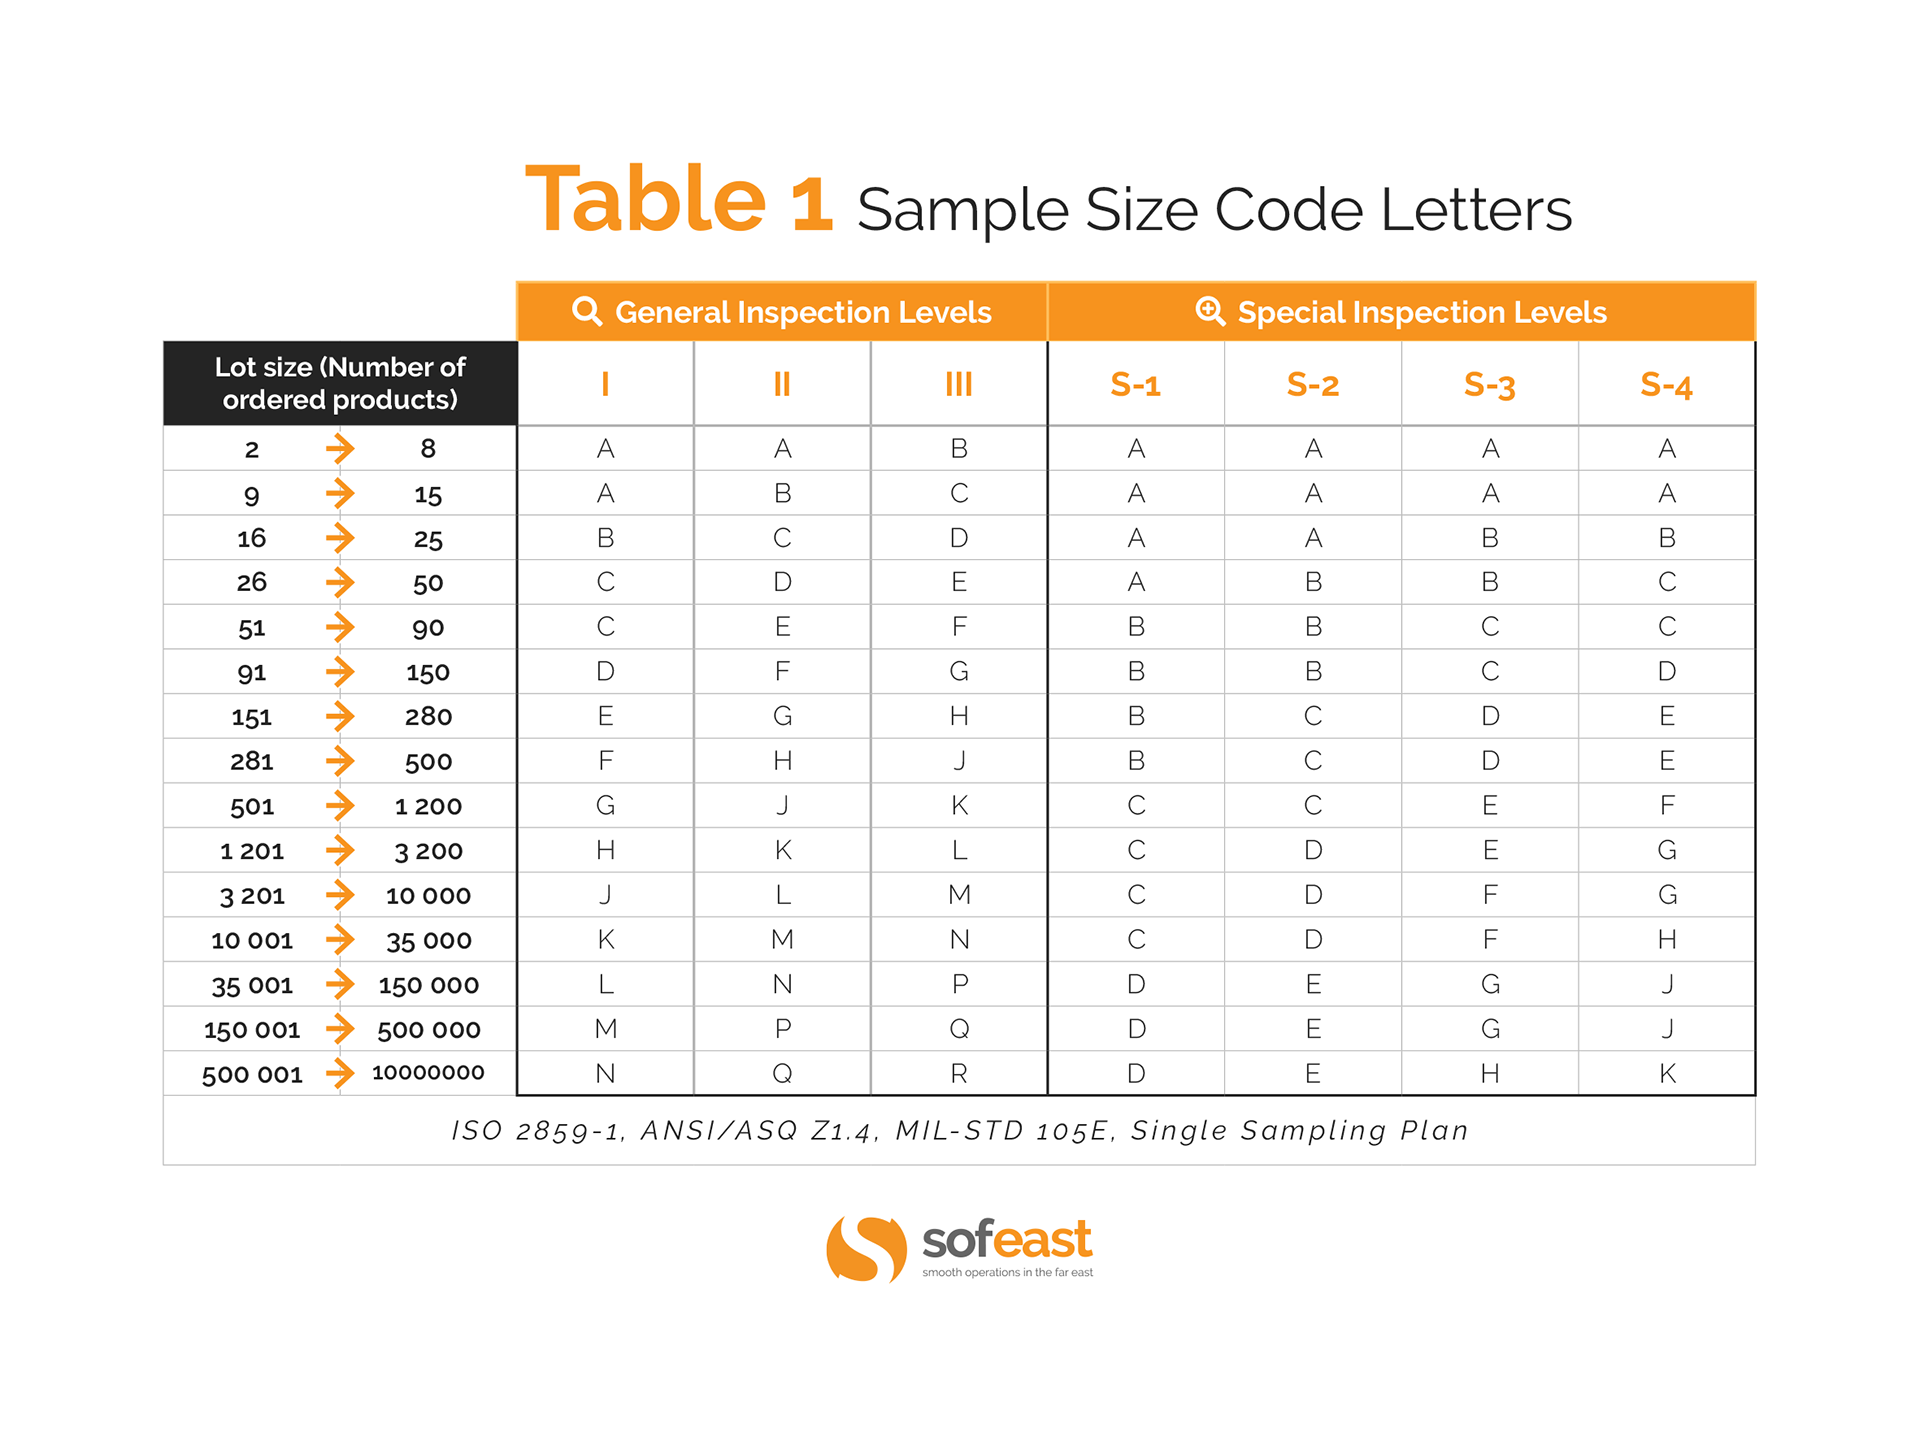 AQL table 1 sample size code letters